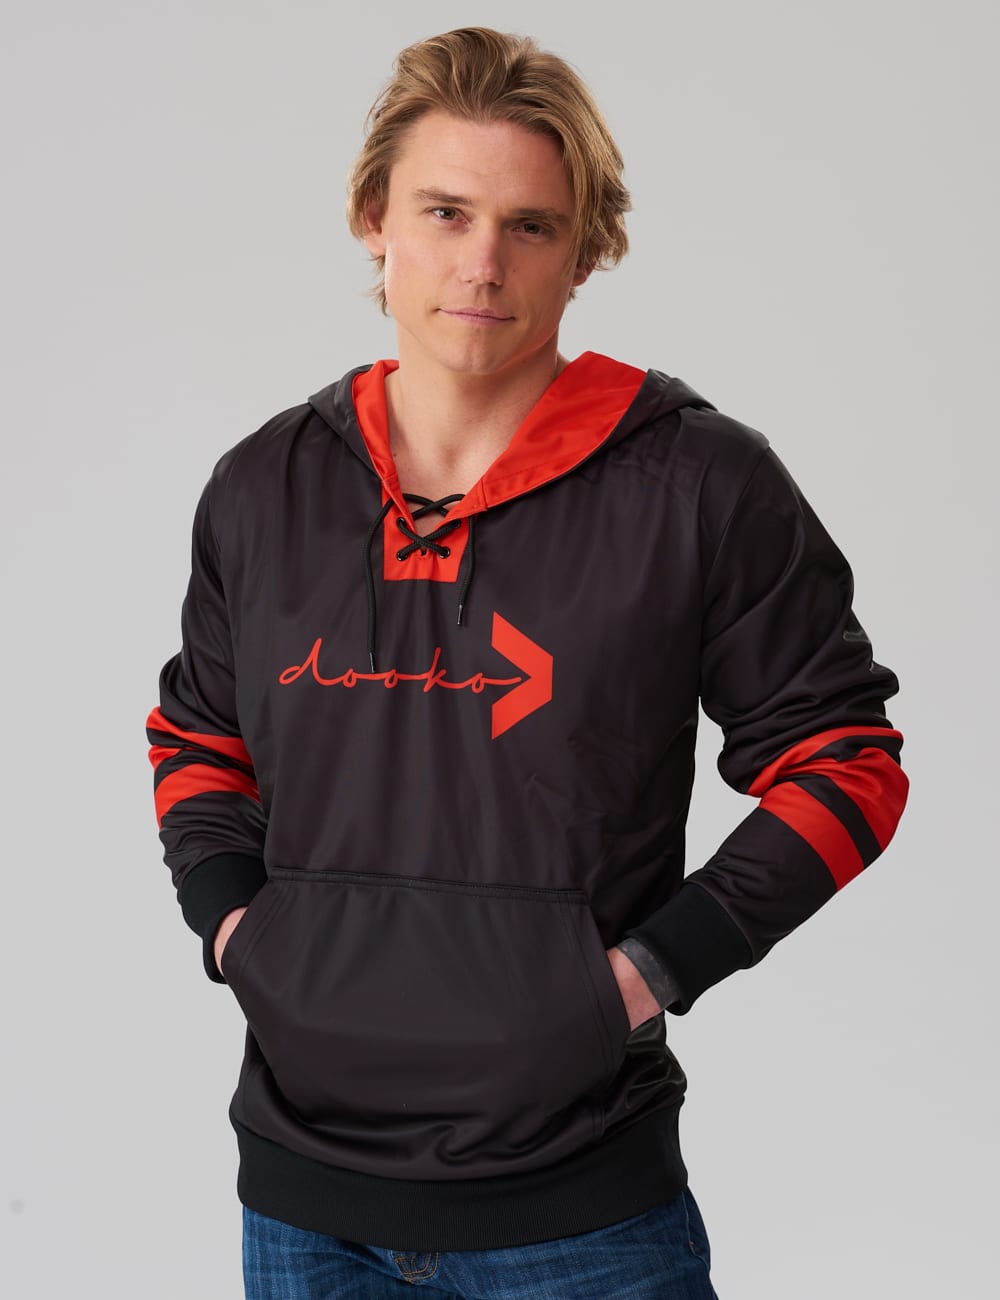 model wearing a black lace-up hoodie with red stripes